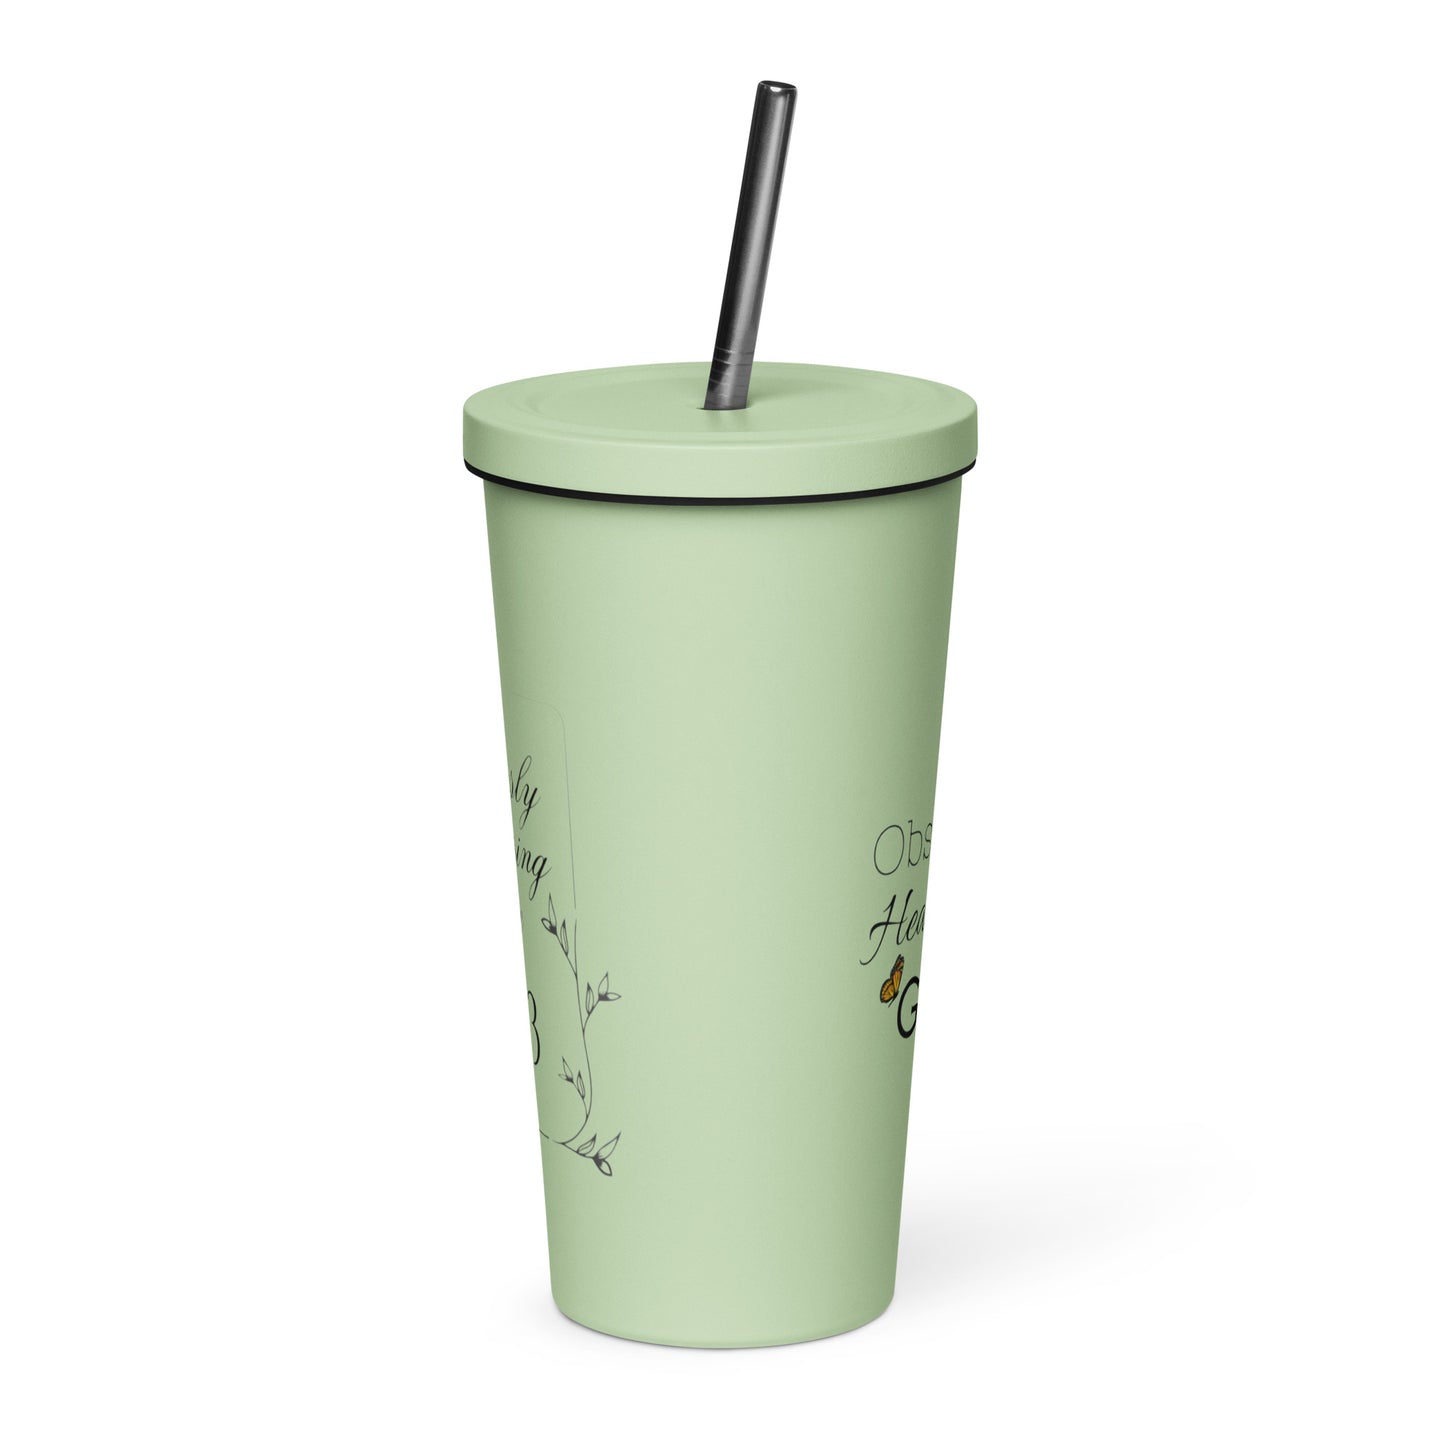 Obstinate, Headstrong Girl Insulated Tumbler with straw